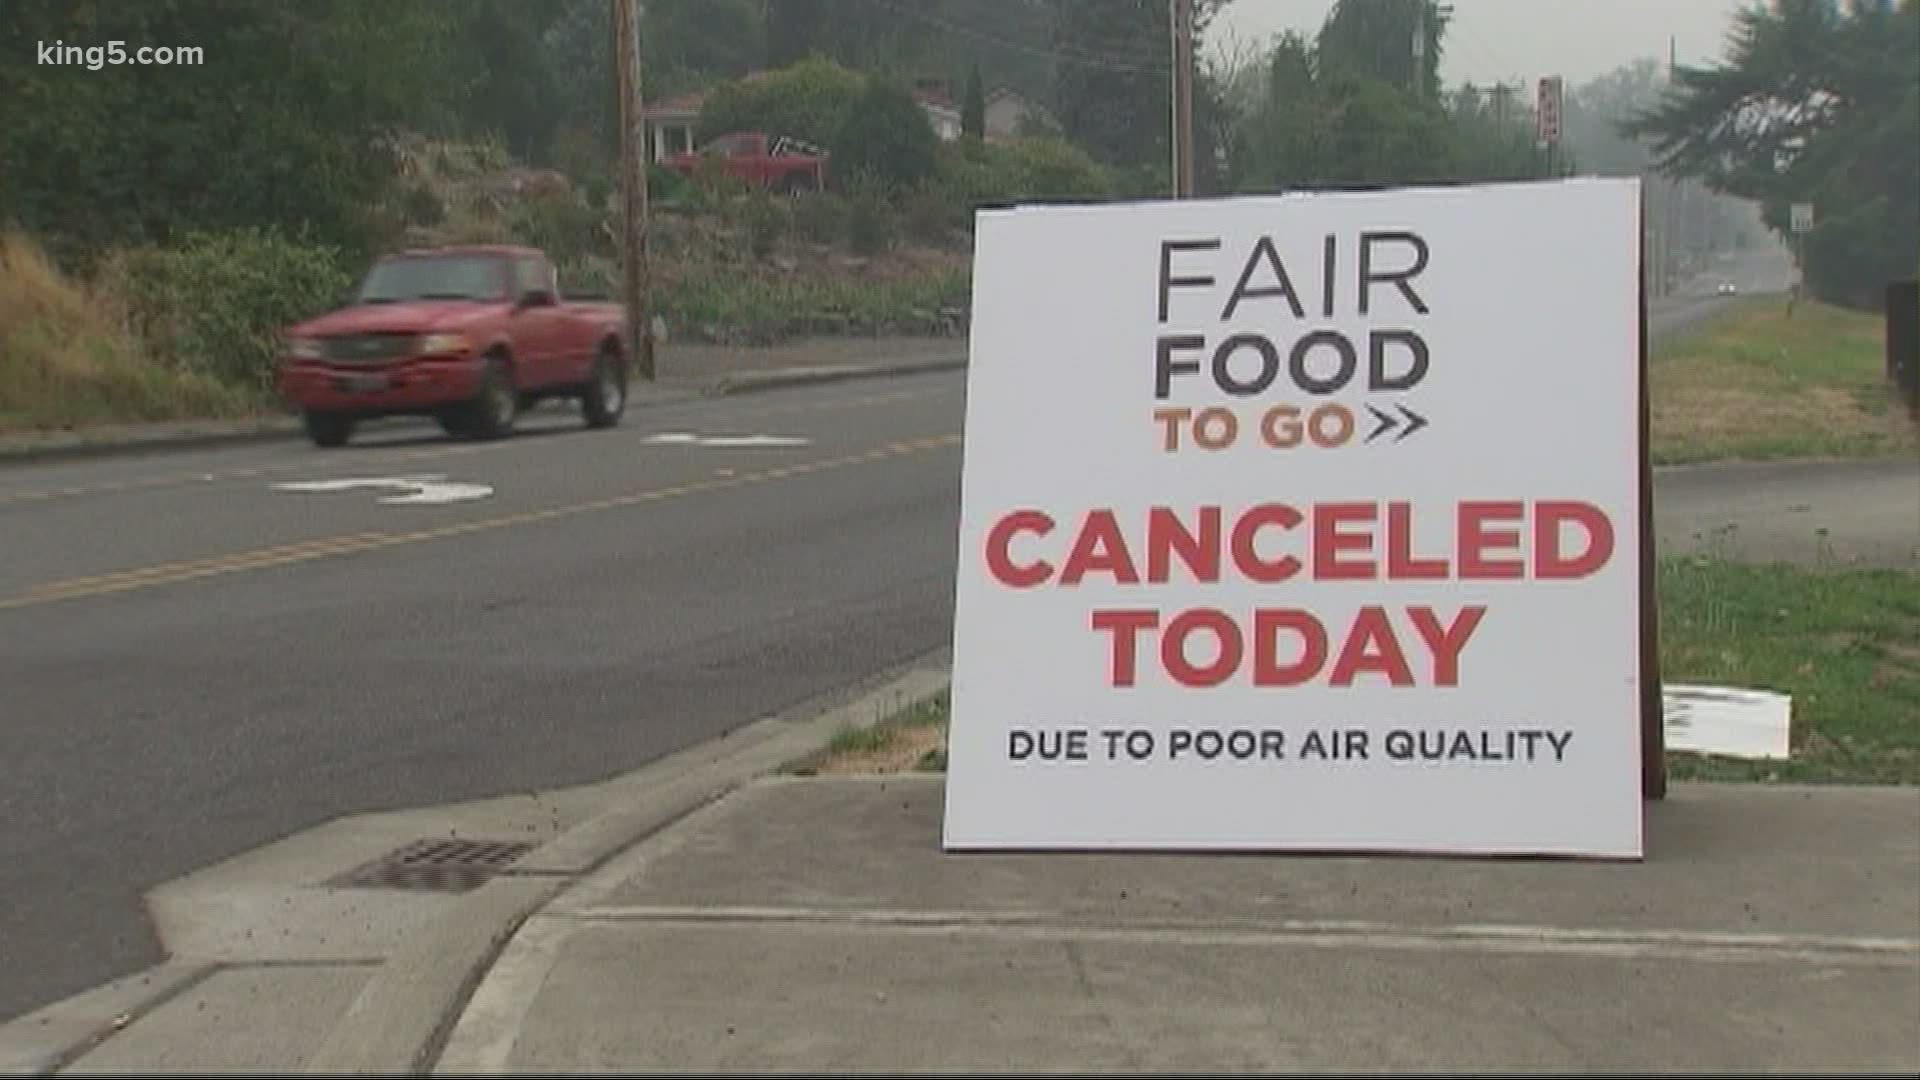 The Washington State Fair is canceled due to the pandemic, but vendors were offering a drive-thru food option this month. Poor air quality forced that to close, too.